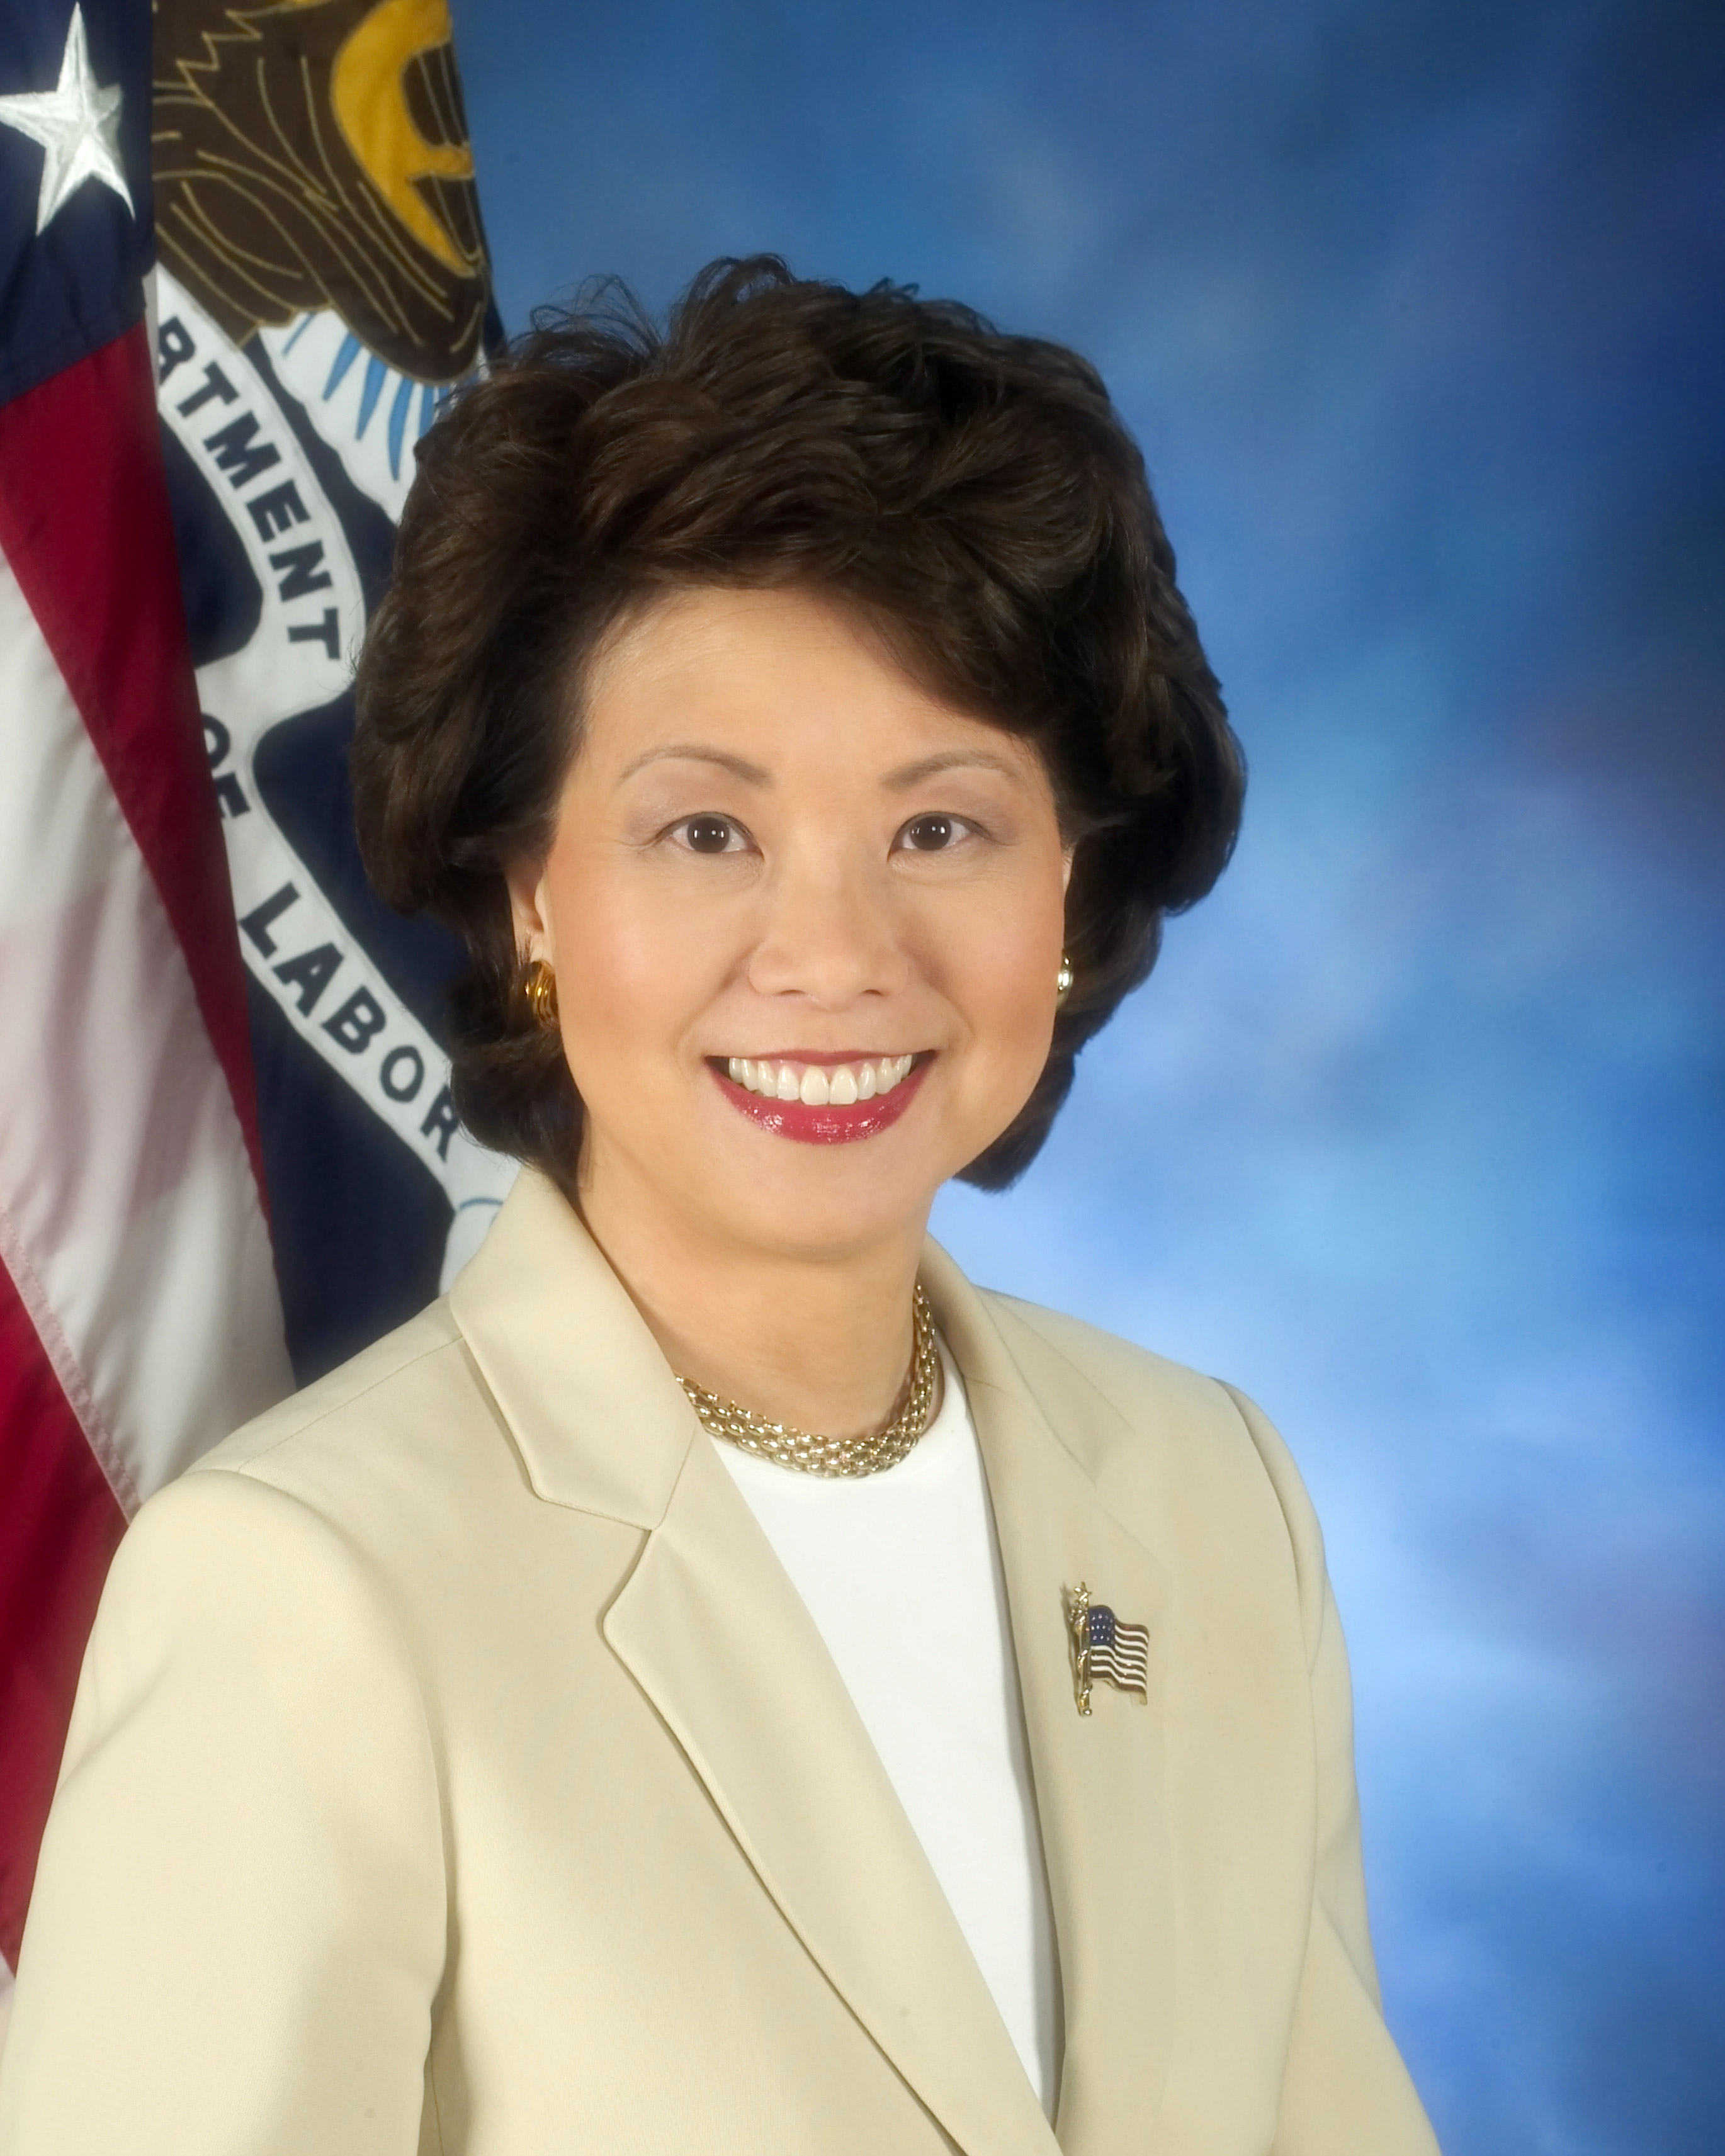 U.S. House panel launches investigation of transportation chief Chao